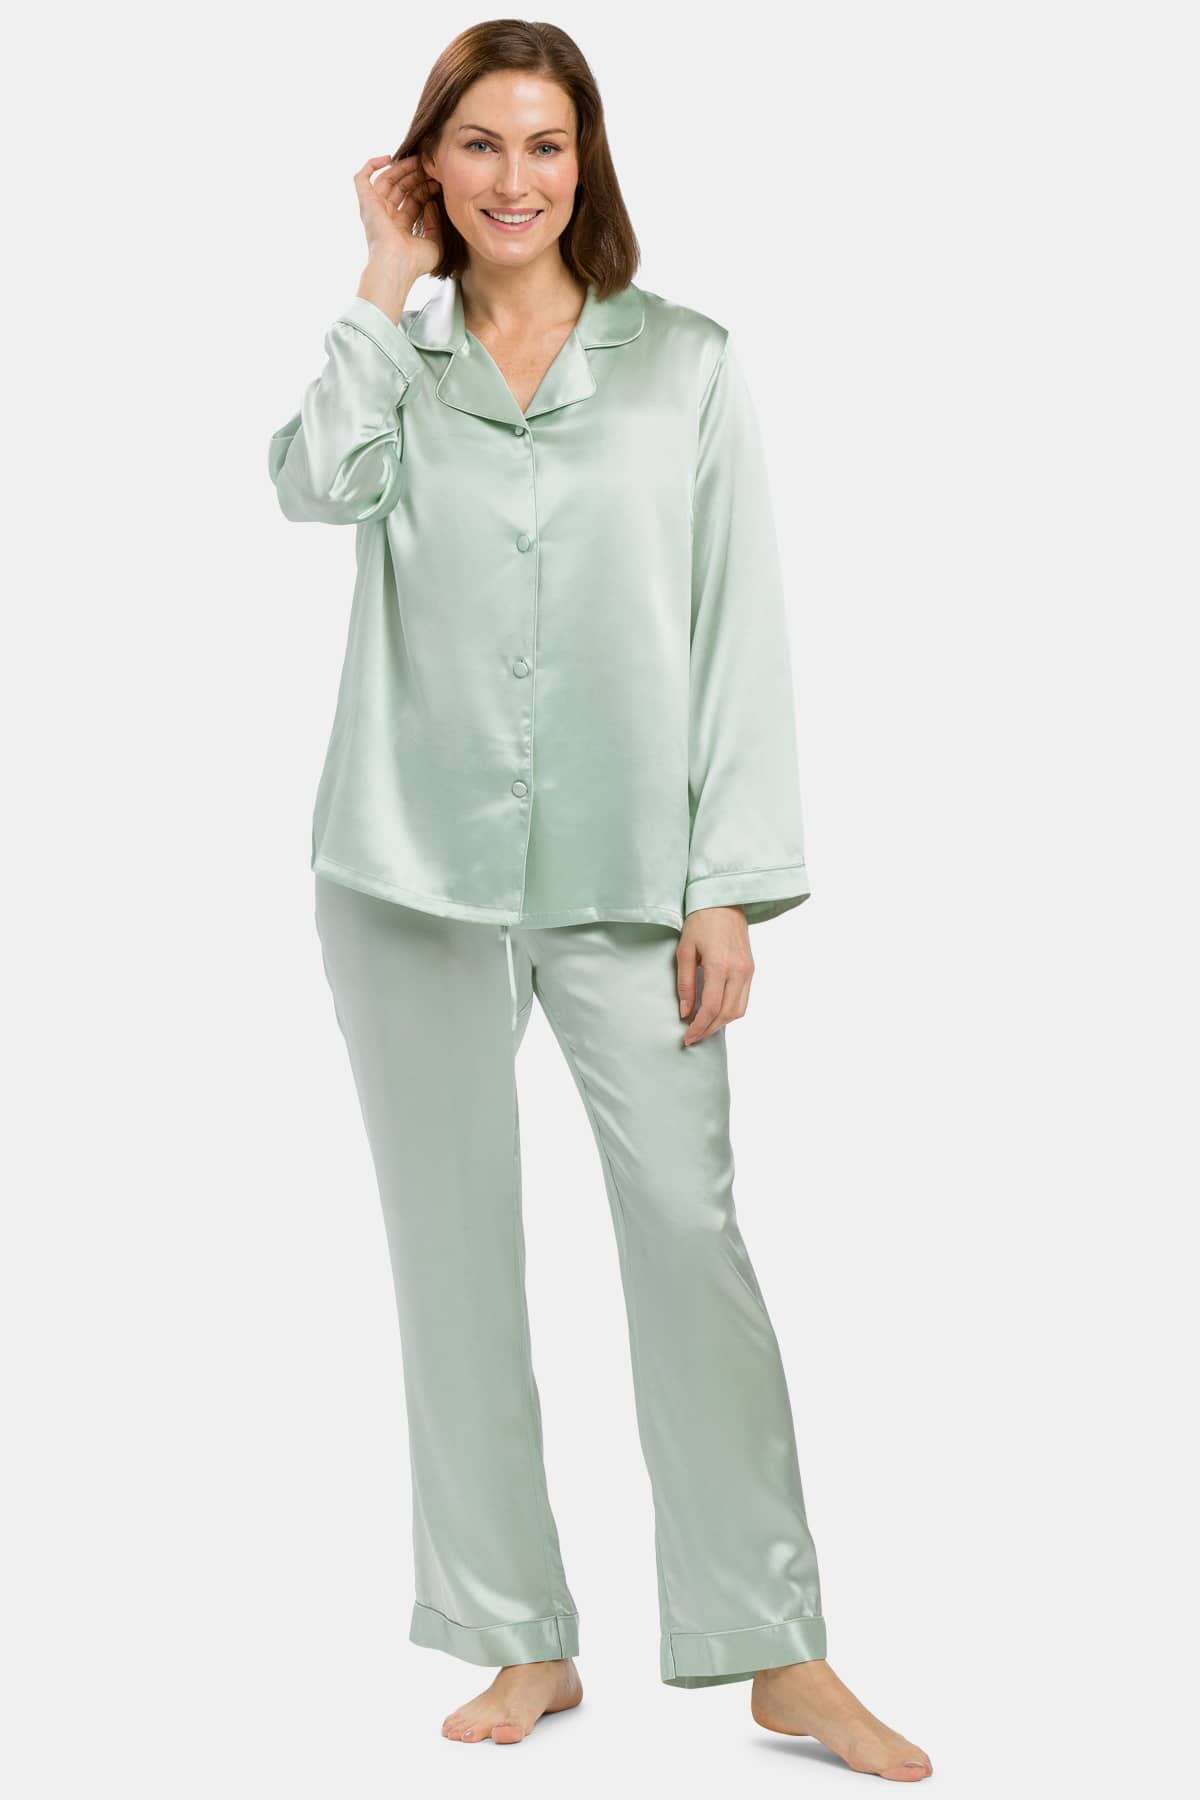 Men's Warm Terry Pajama PJ Set - Cuffs at Sleeve and Legs - Perfect for  Cold Nights